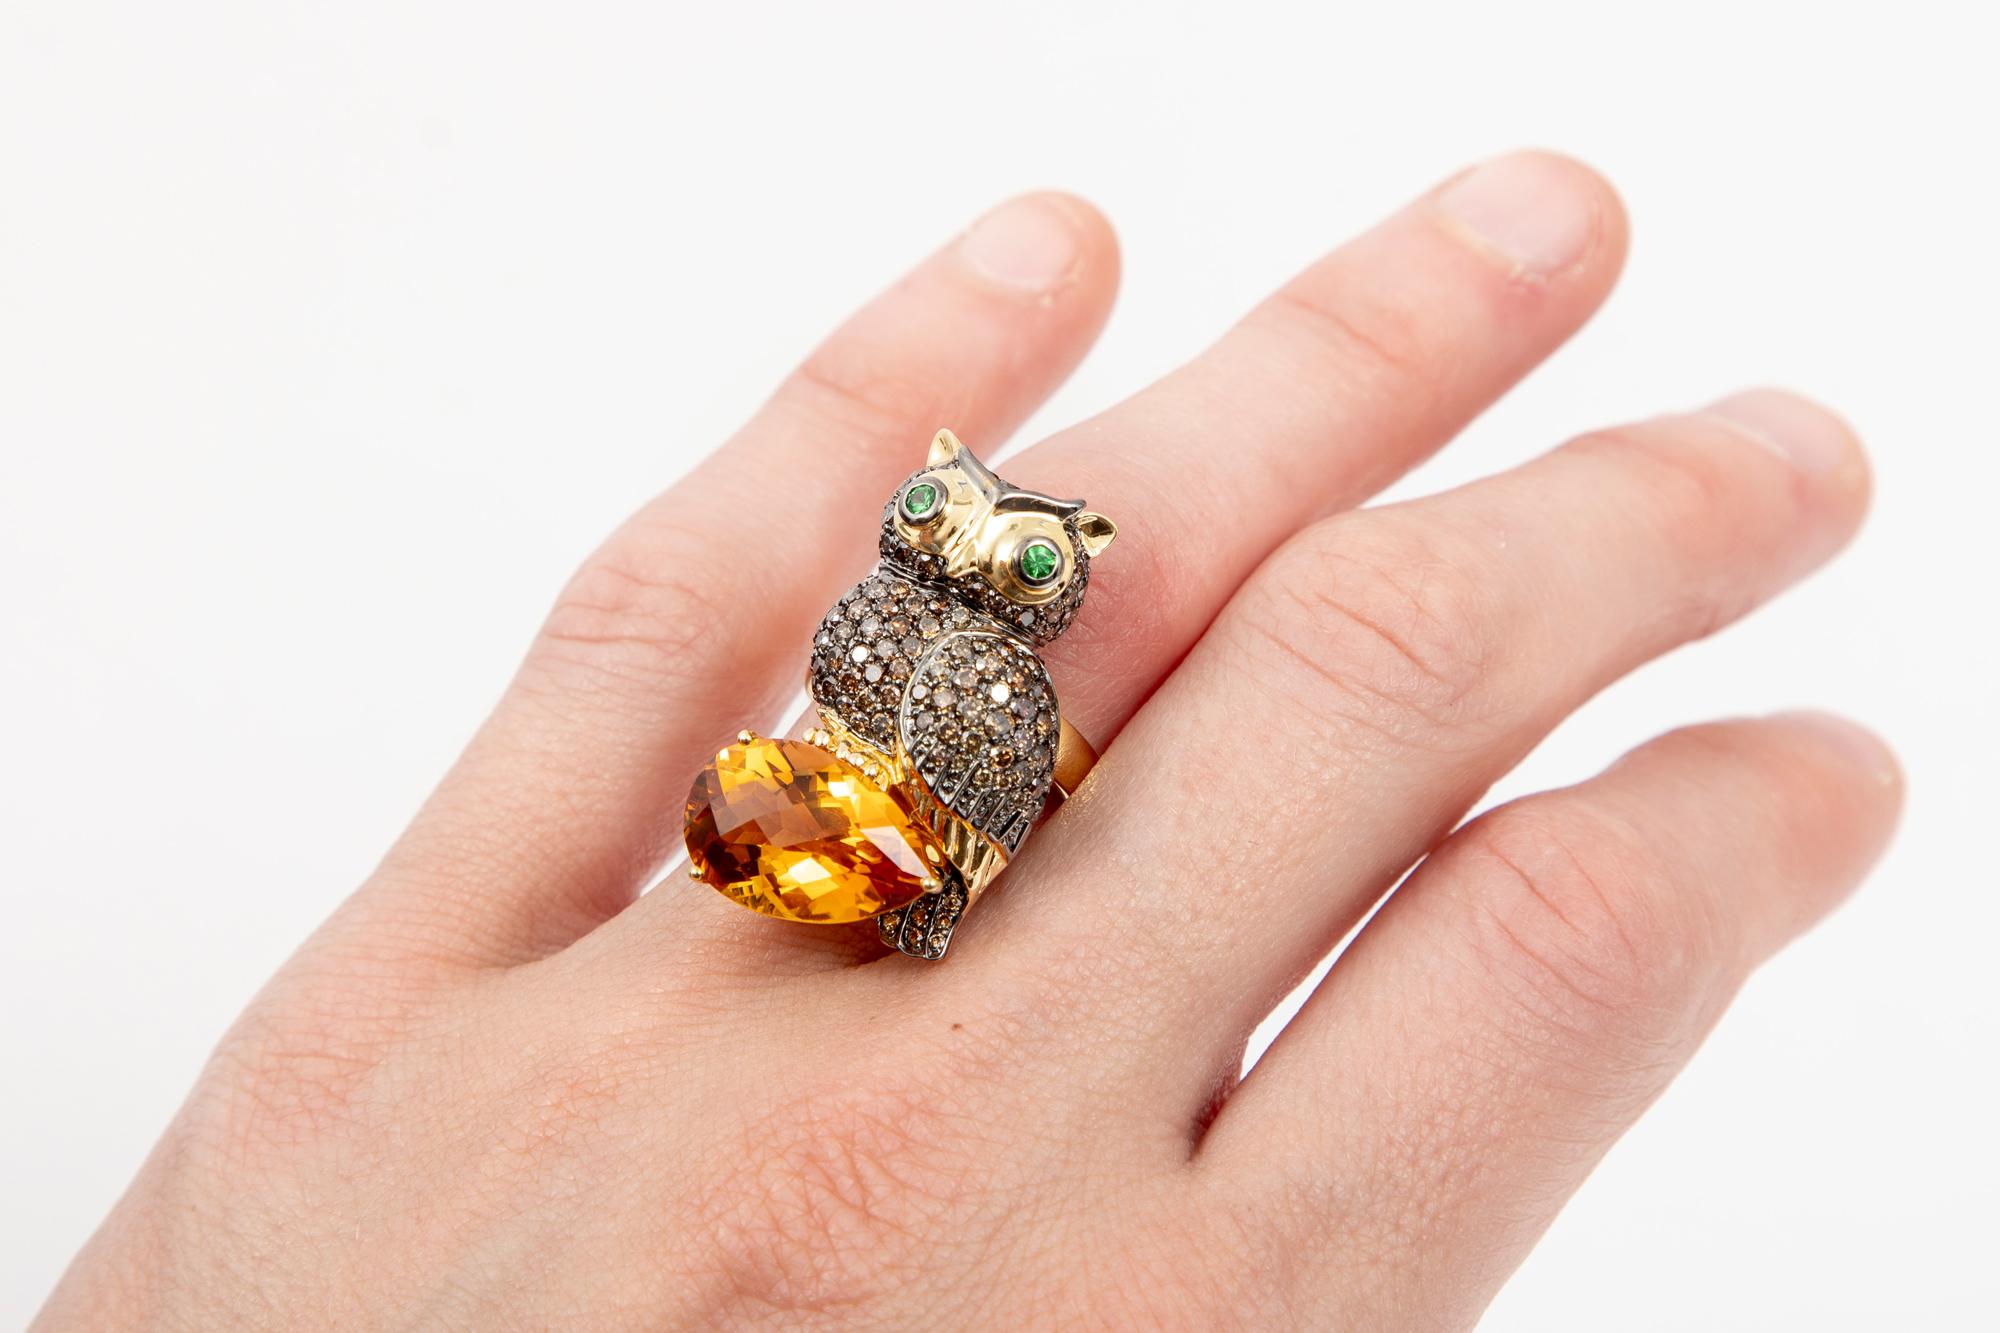 18k Gold Cognac Diamond Owl Ring/Pendant Set with Tourmaline and Citrine For Sale 8